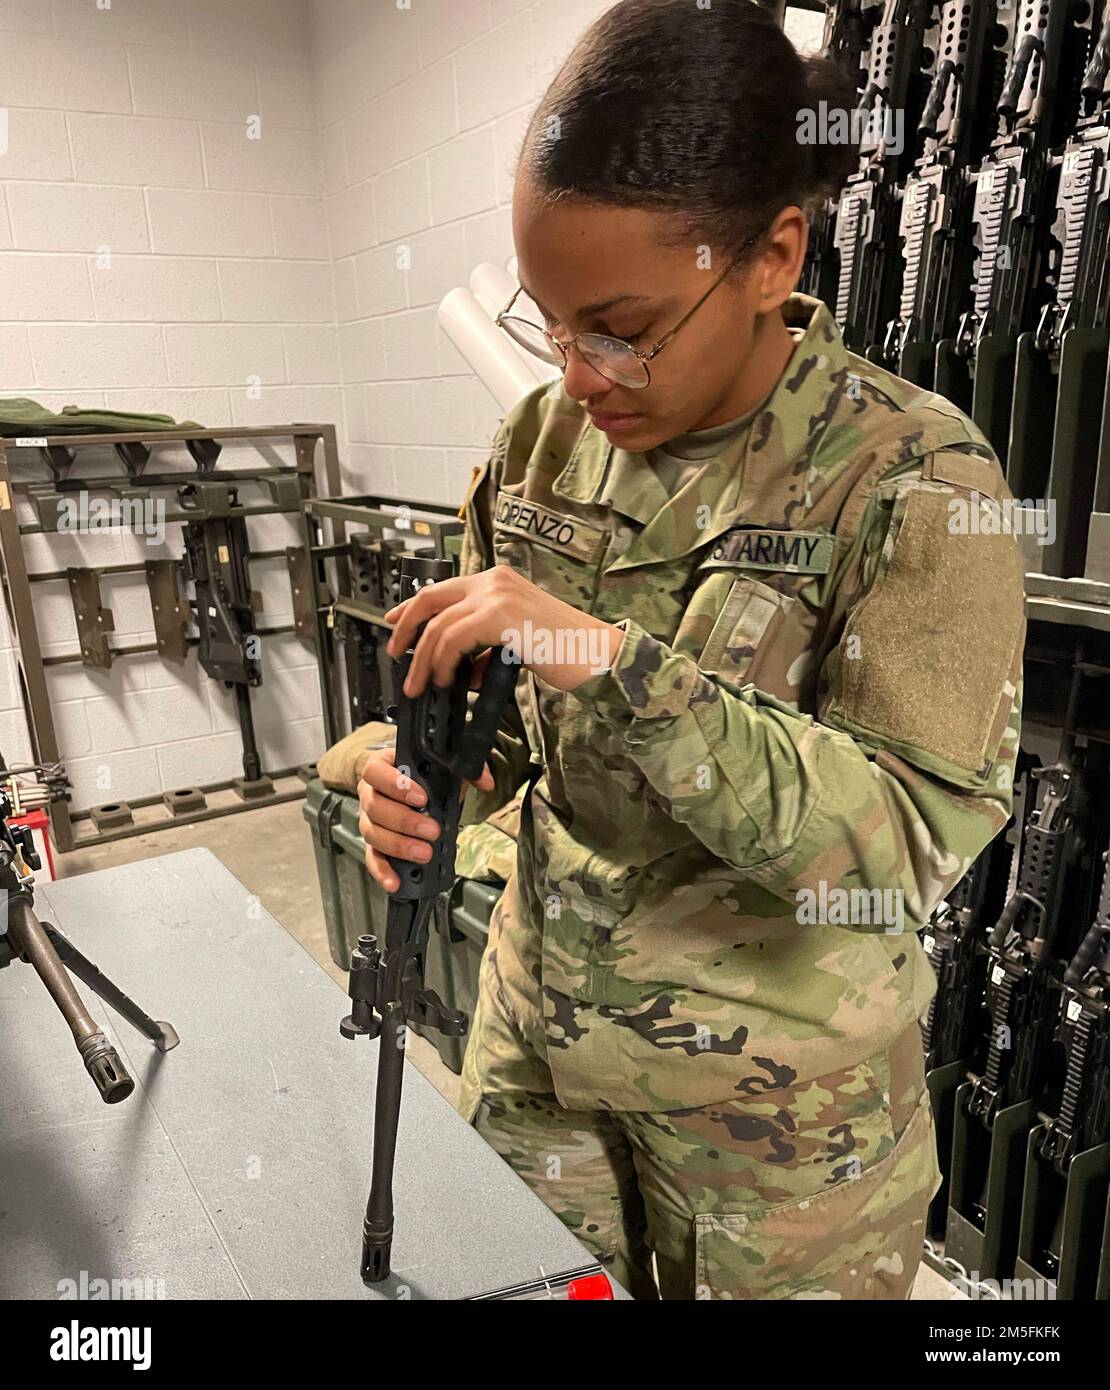 Pfc. Melody Lorenzo, a brand new Soldier with B Company, 328th Brigade Support Battalion, 56th Stryker Brigade Combat Team, 28th Infantry Division, supports her company in performing checks and inspections on M249 squad automatic weapons during drill weekend. The Soldiers from the company checked their equipment in preparation for the battalion to travel to Fort Pickett, Va., for future training. Stock Photo